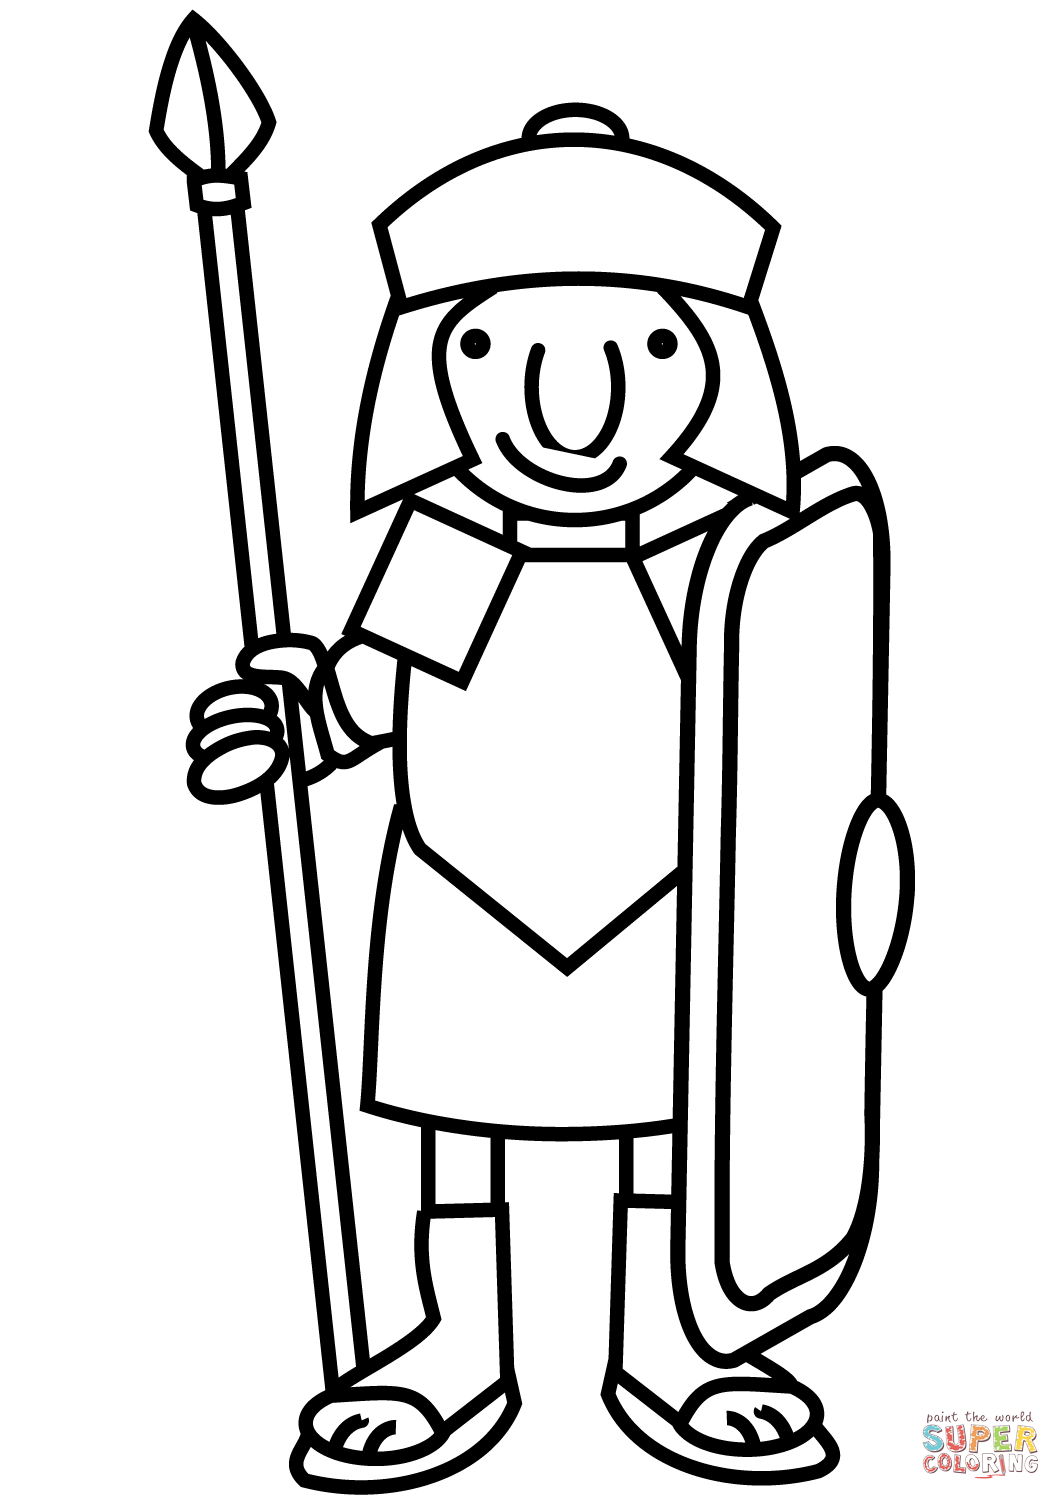 Cartoon Roman Soldier coloring page | Free Printable Coloring Pages